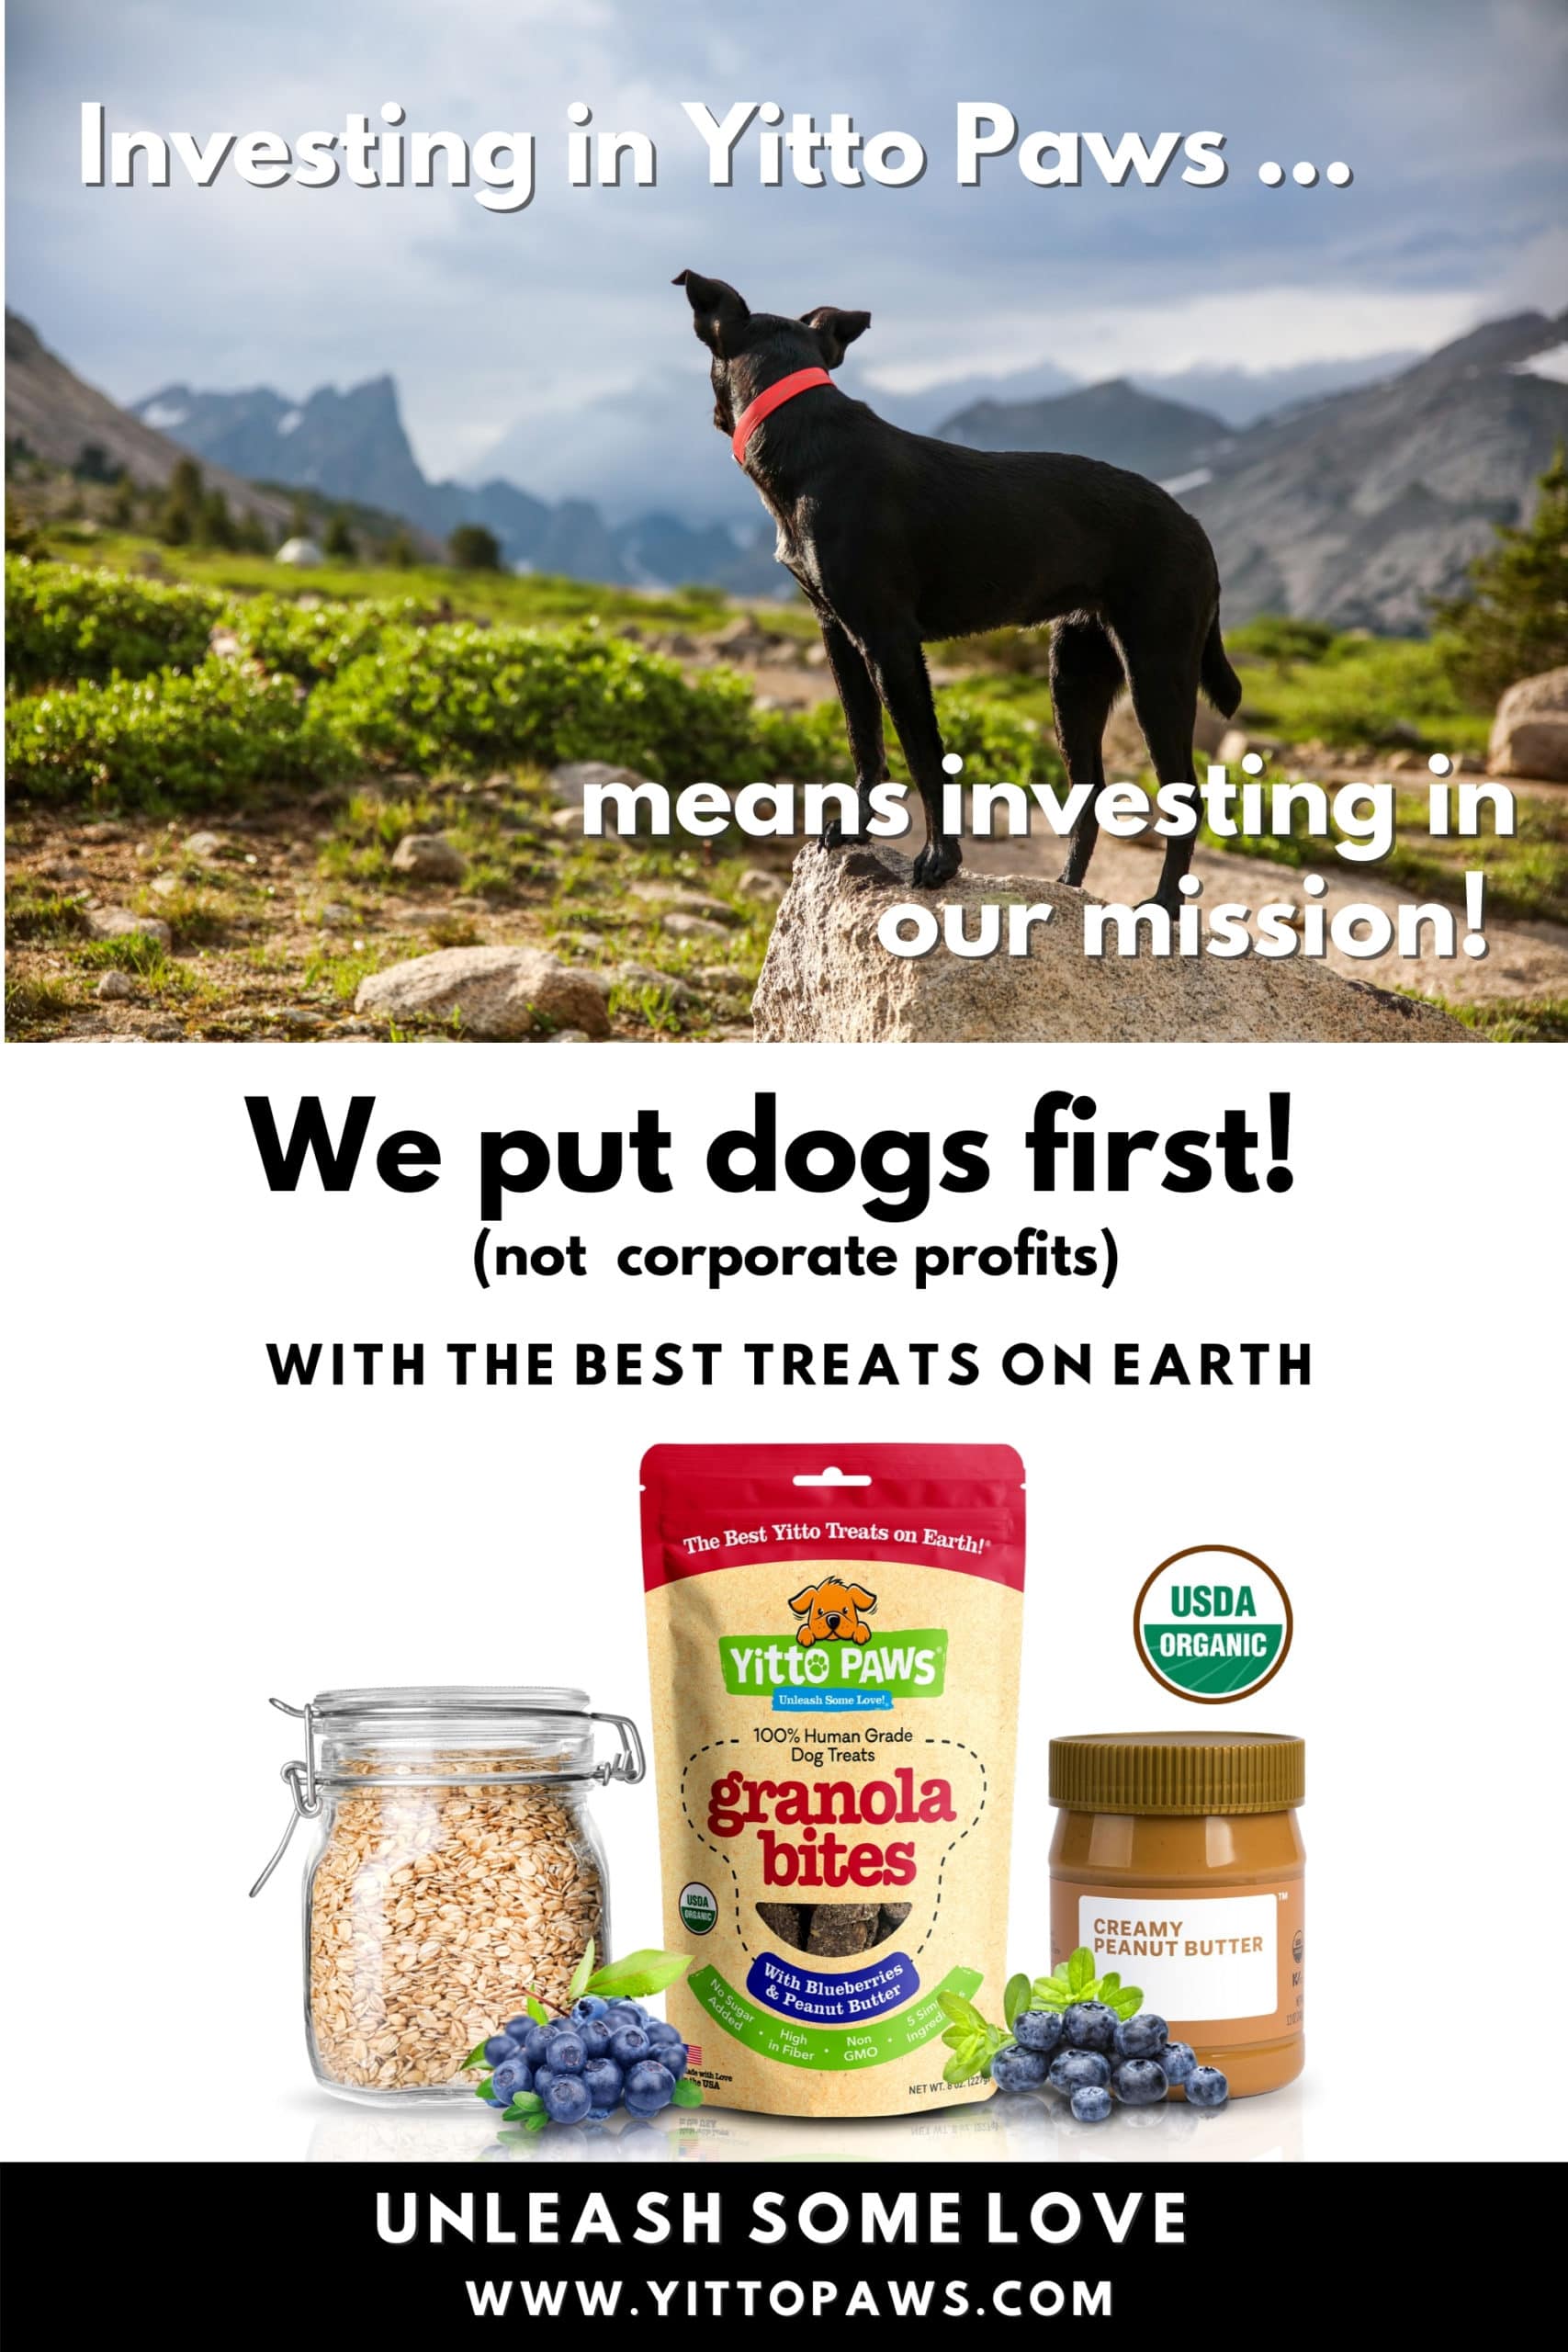 Investing in Yitto Paws mean investing in our mission to put dogs first!